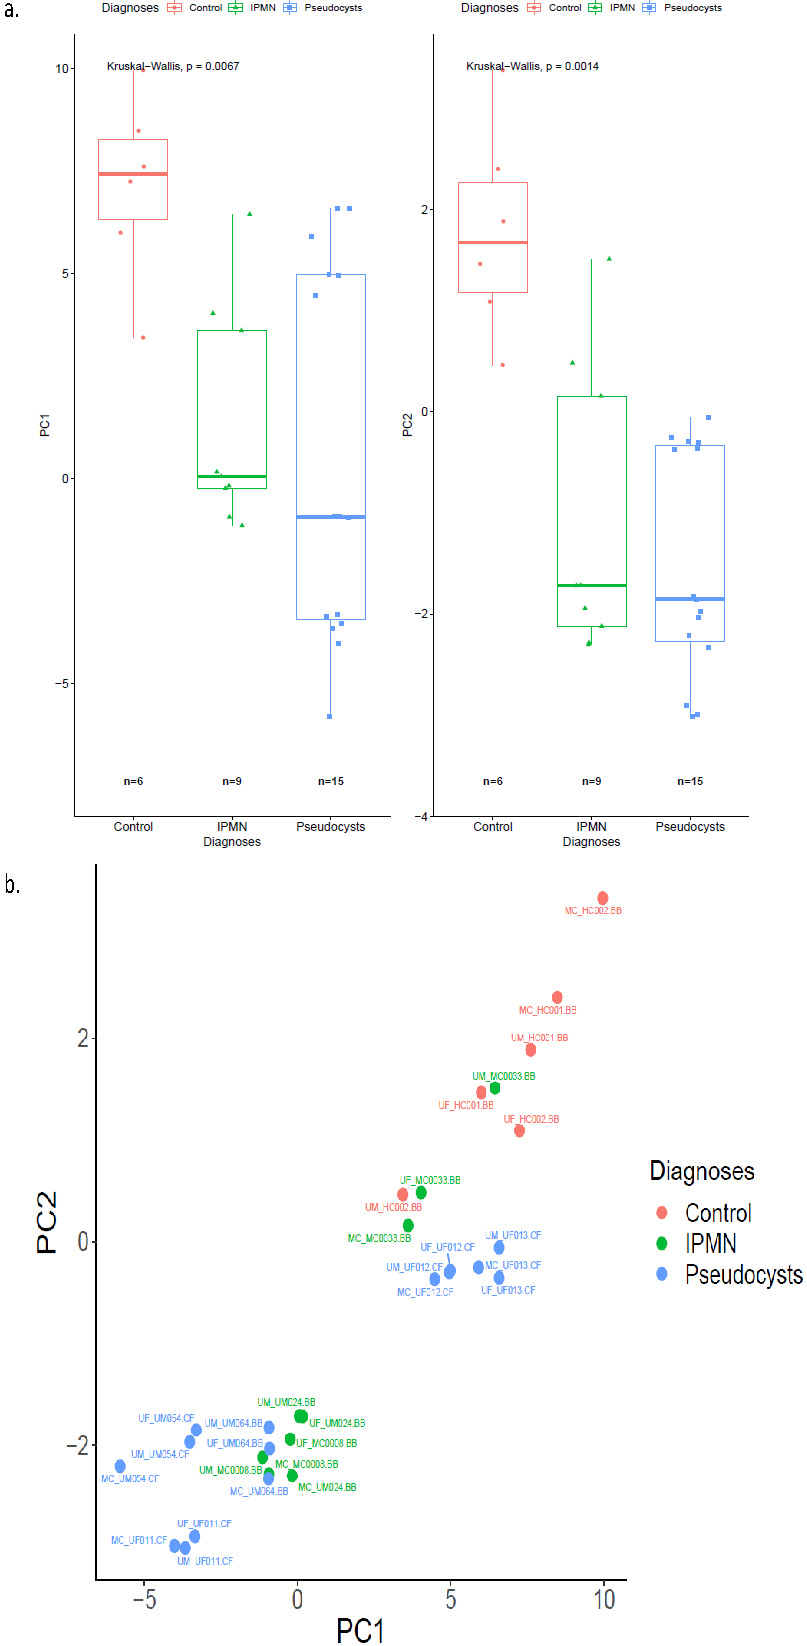 Endogenous expression of 55 miRNAs and 3 ligation controls in study samples characterized by principal components for each diagnosis type represented by a) box plots and b) scatterplots.